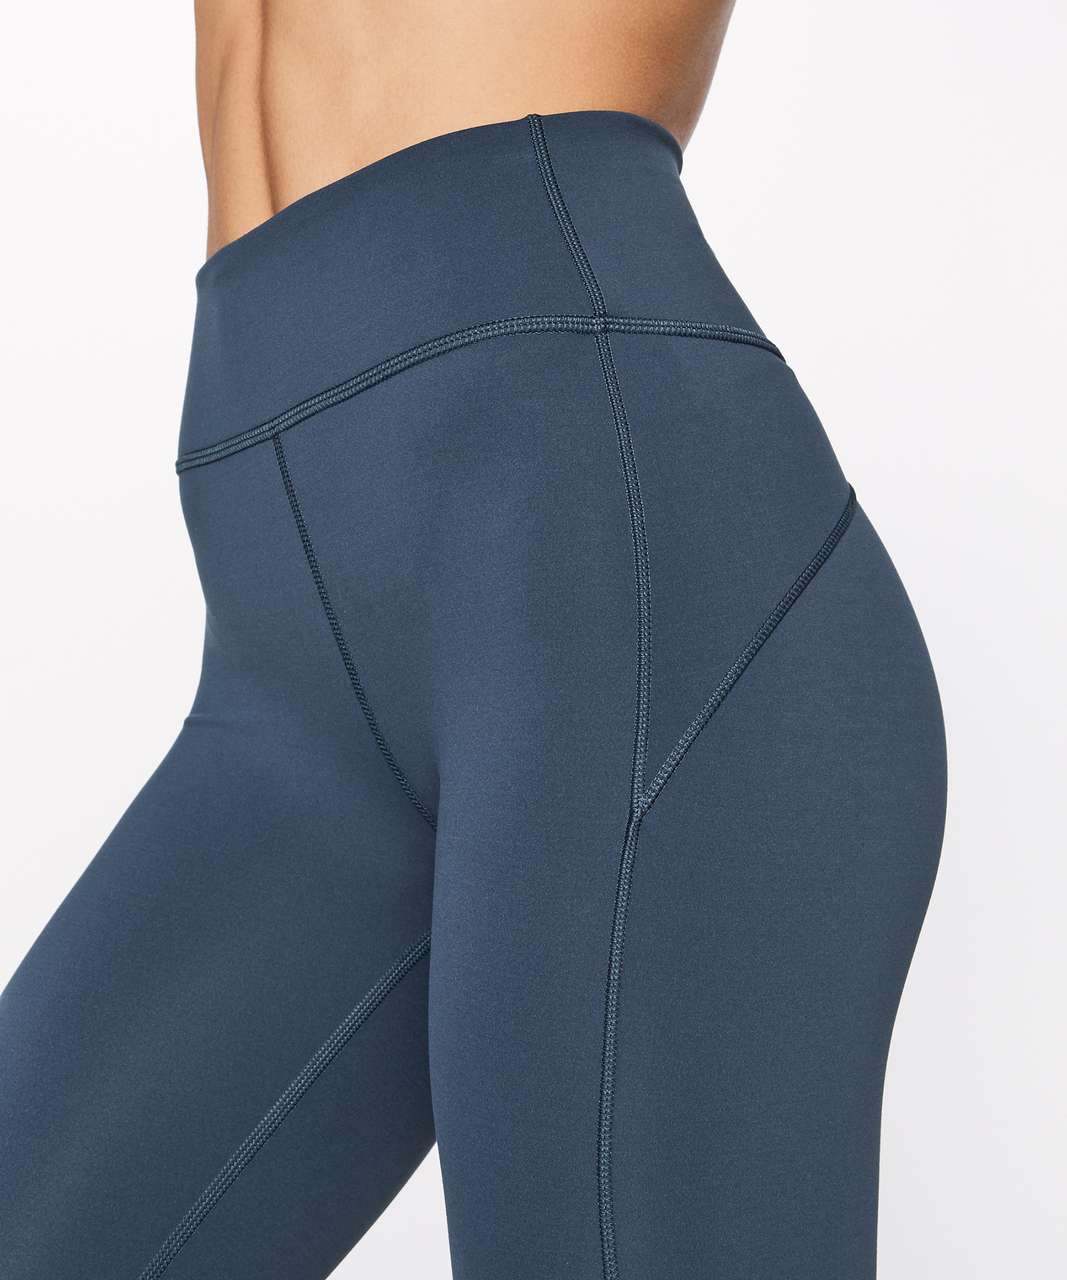 Lululemon In Movement 7/8 Tight *Everlux 25 Black 4 #W5ANXS *Discontinued